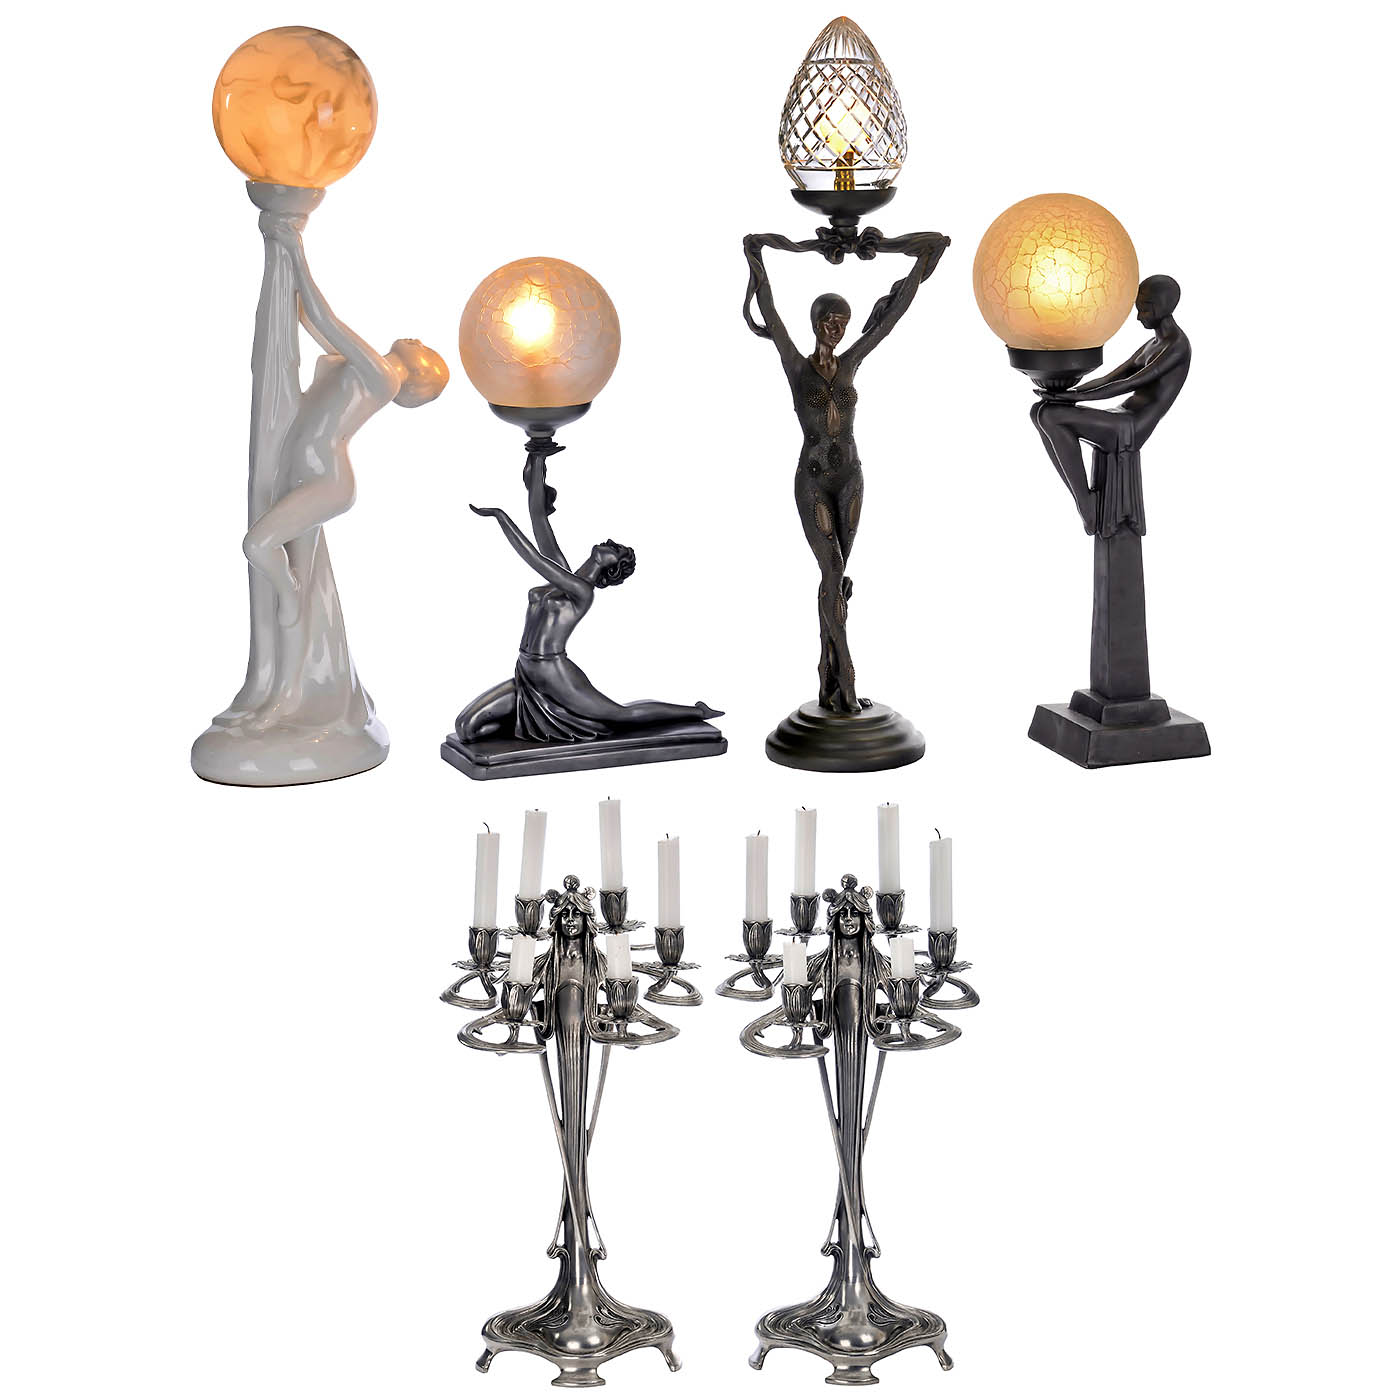 2 Art-Nouveau-Style Candle Holders and 4 Table Lamps, c. 1990 - Image 2 of 5